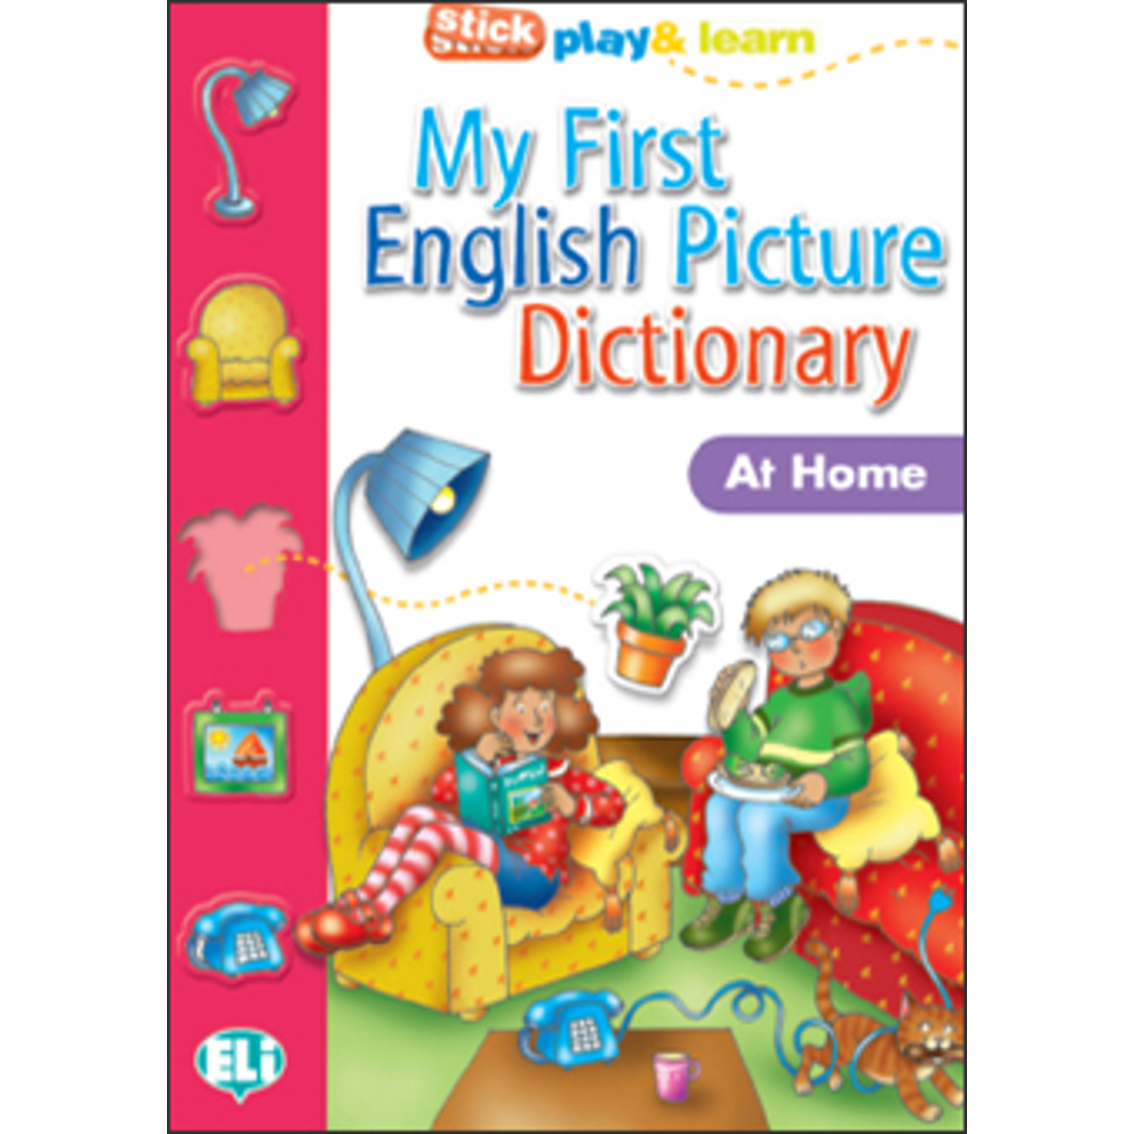 My First English Picture Dictionary - At home - Lenguas Modernas Editores